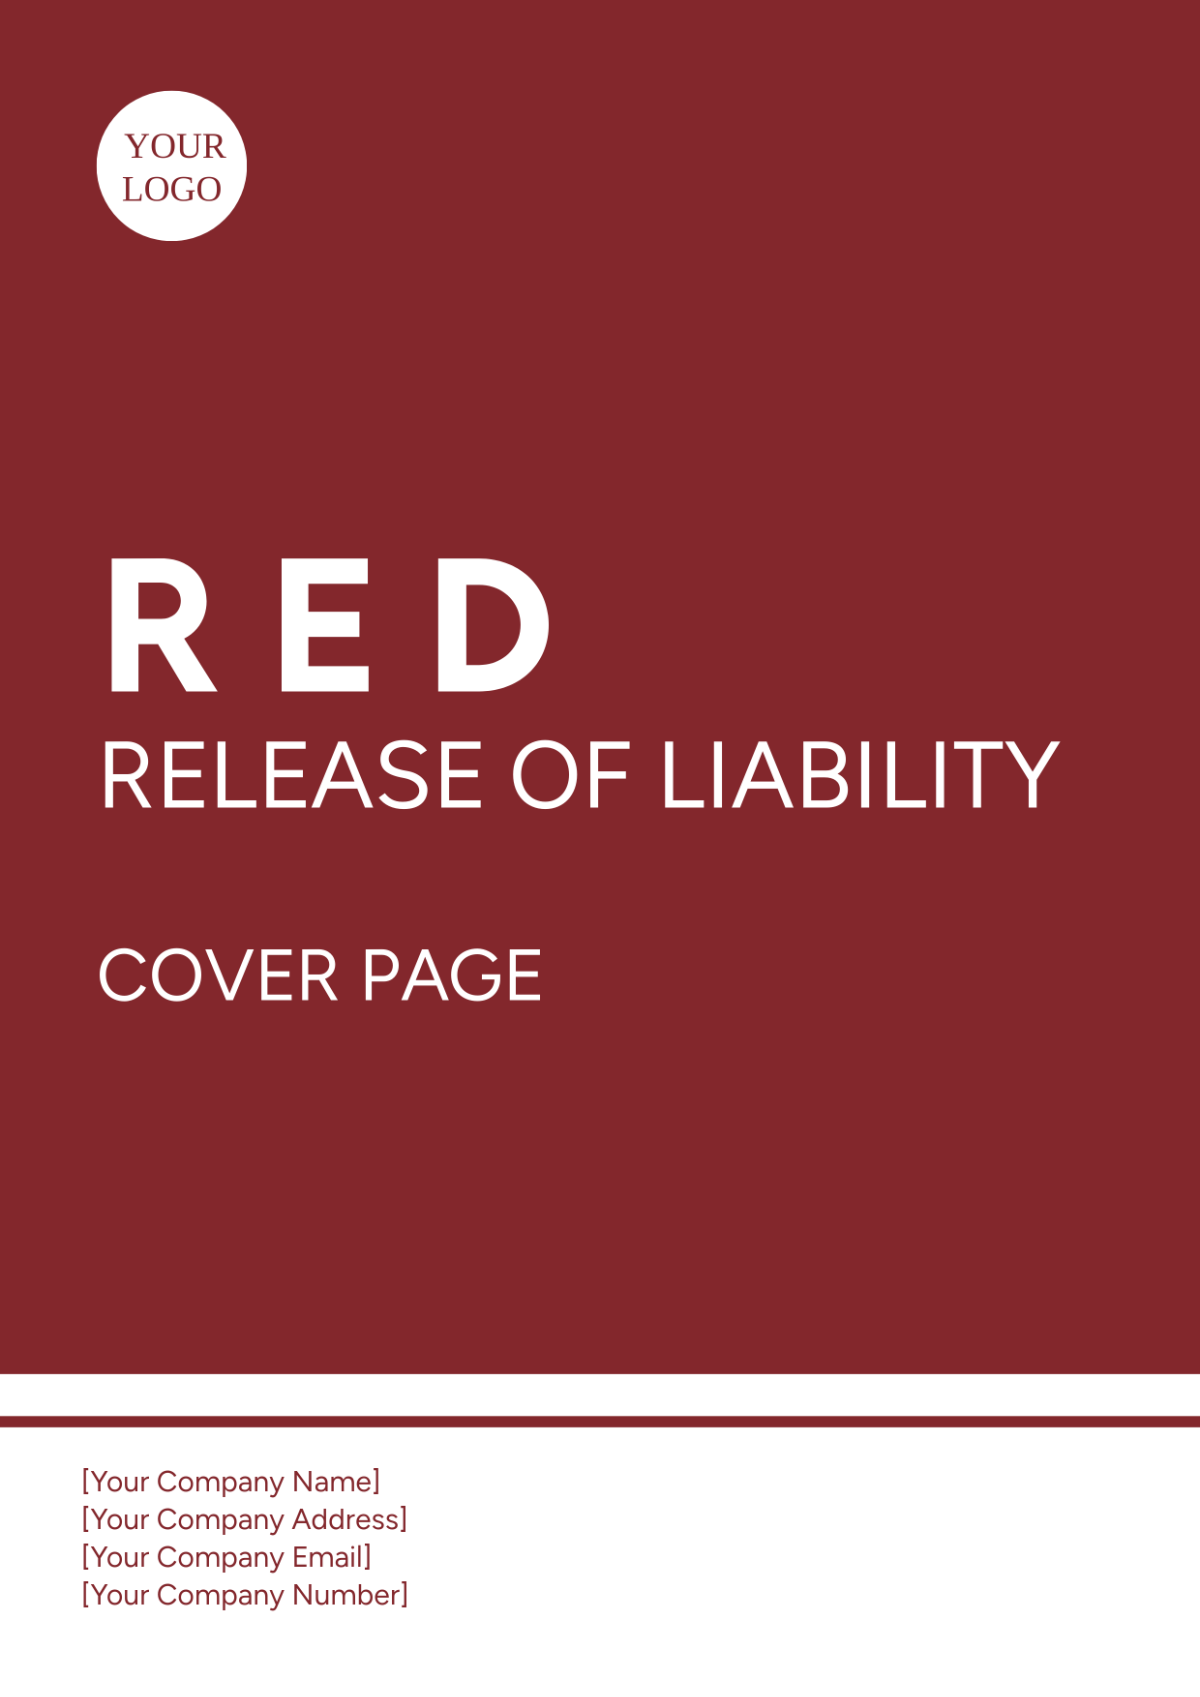 Red Release of Liability Cover Page